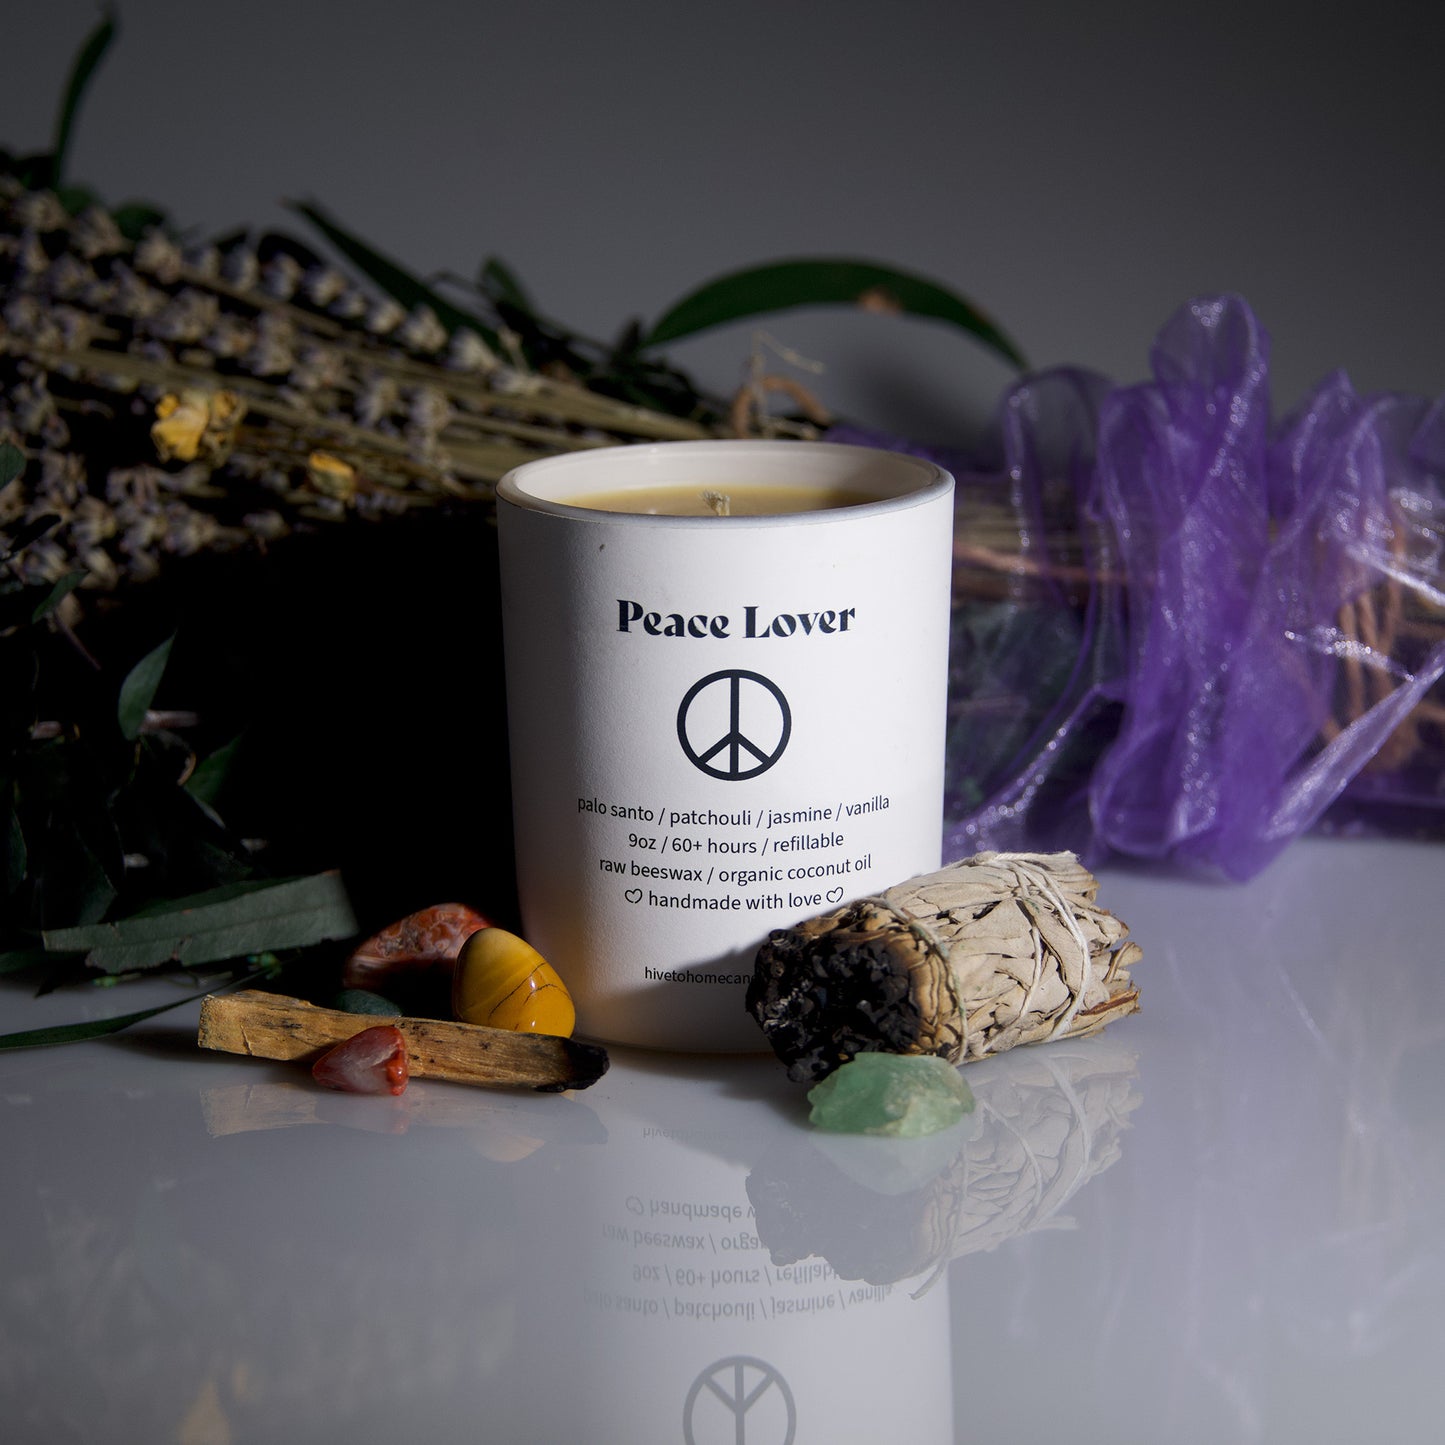 Peace Lover Scented Beeswax Candle. Palo Santo, Patchouli, Jasmine, and Vanilla